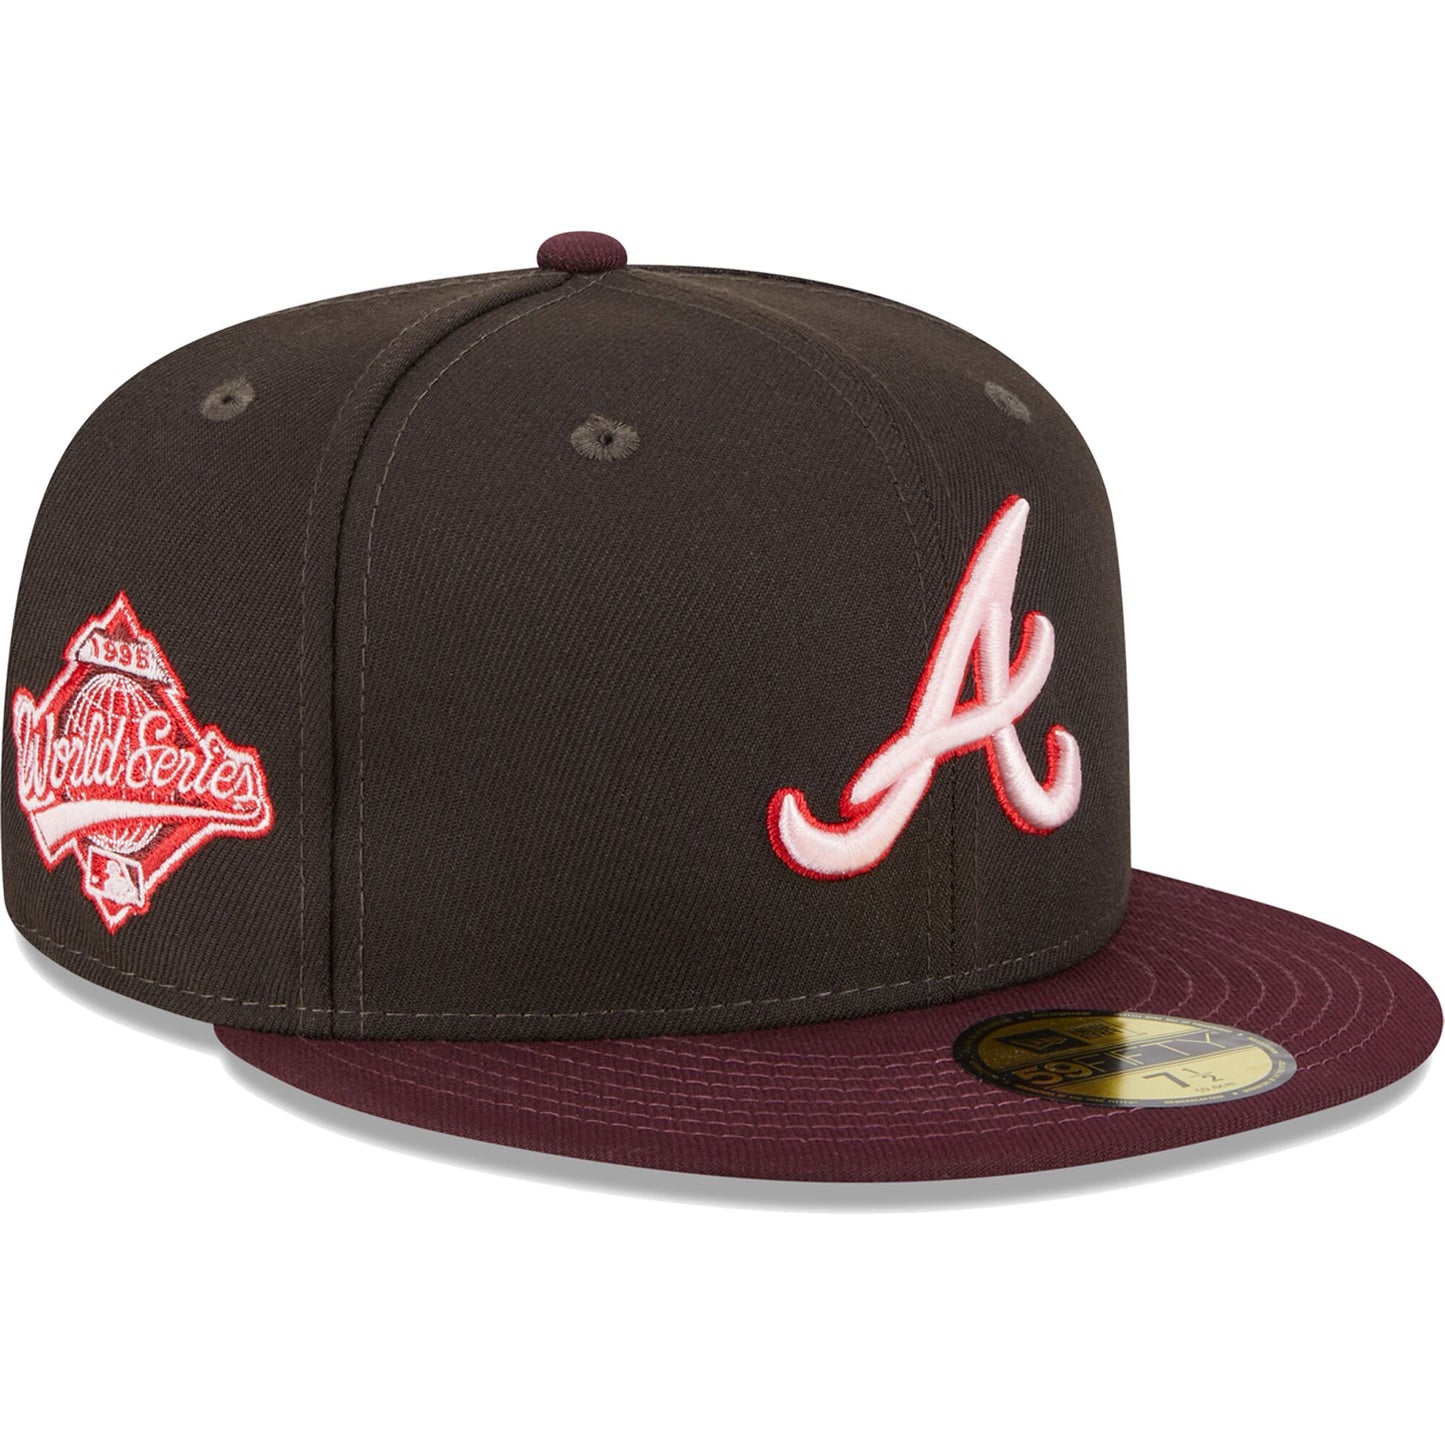 Atlanta Braves New Era Chocolate Strawberry 59FIFTY Fitted Hat - Brown/Maroon